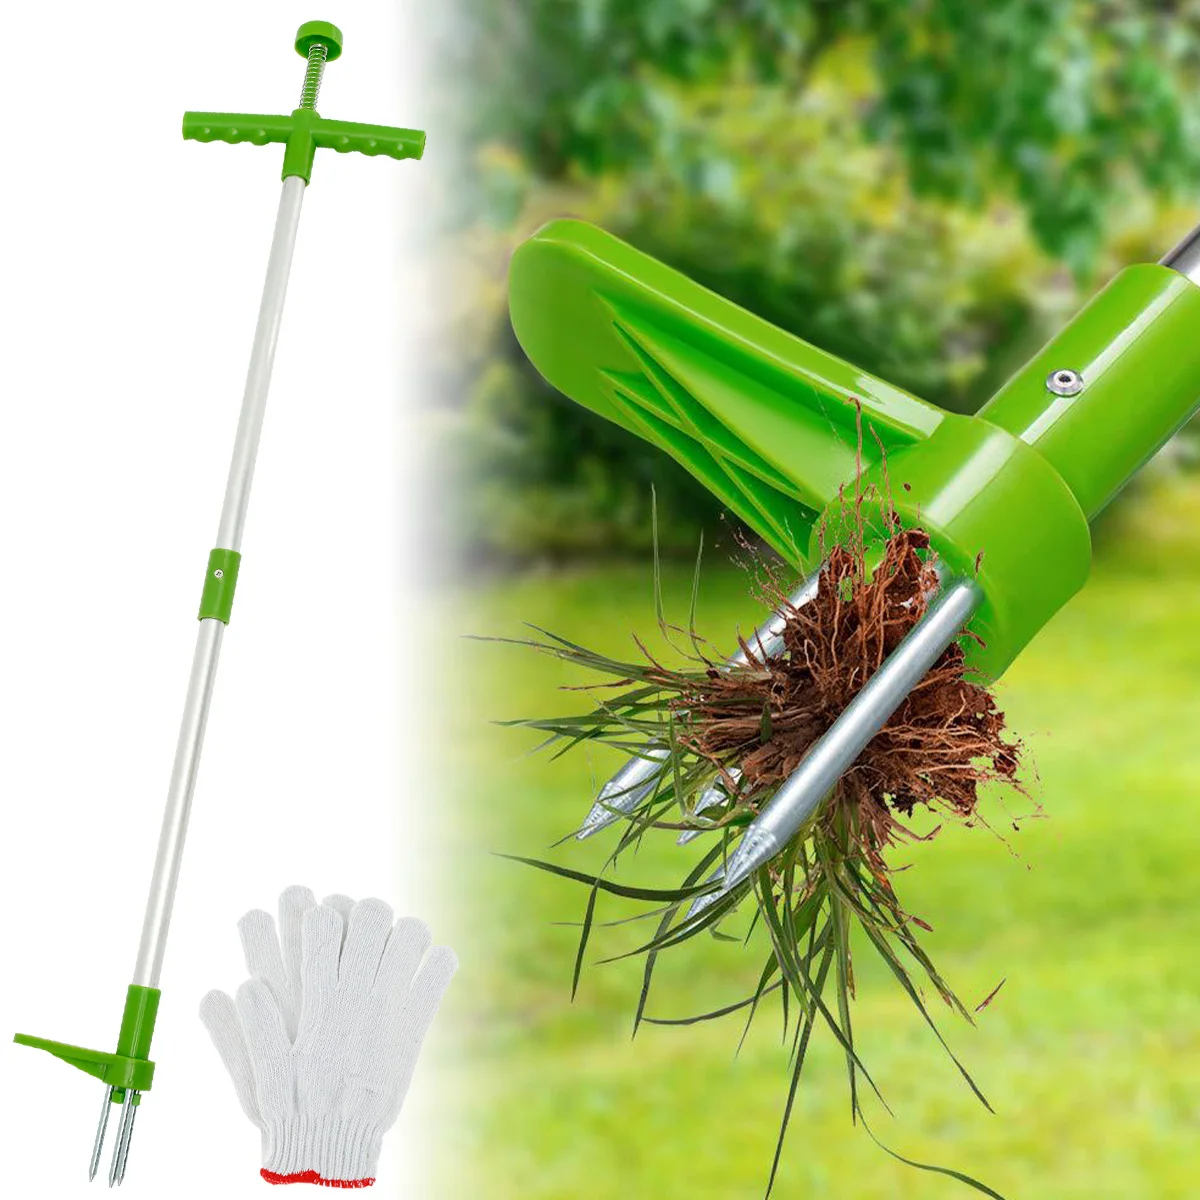 

39inch Weed Puller Stand Up Manual Weed Removal Tools Long Handle Weeder Hand Tool with Stainless Steel Claw Sturdy Lightweight